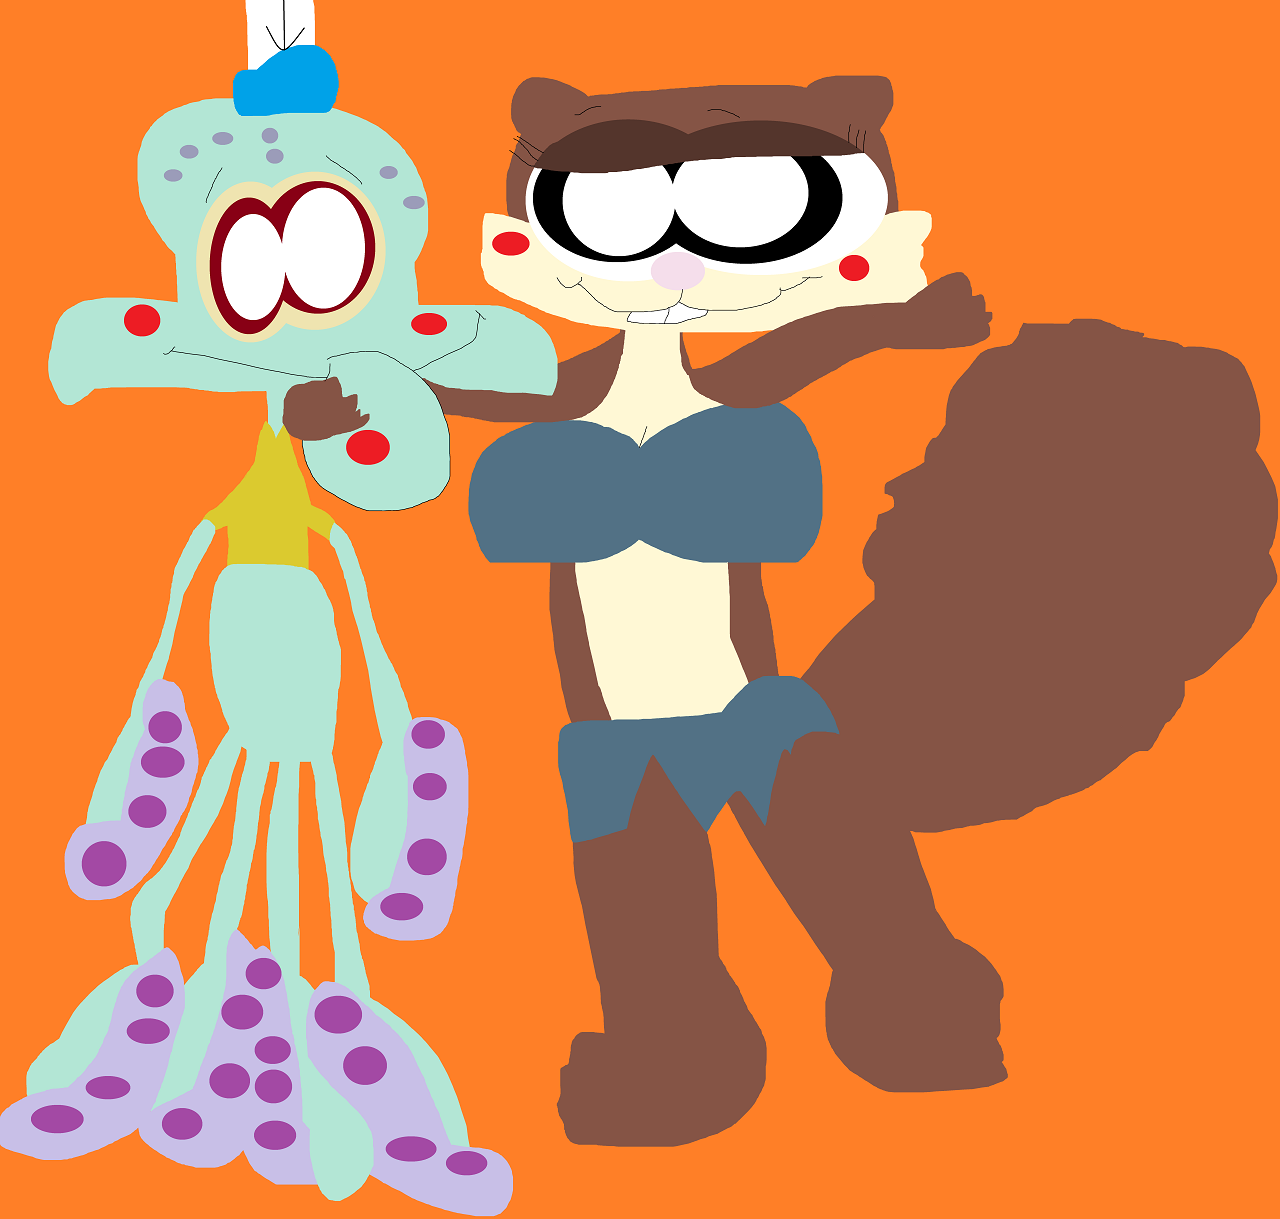 Sandy Is About To Kiss Squidward Yet Again by Falconlobo